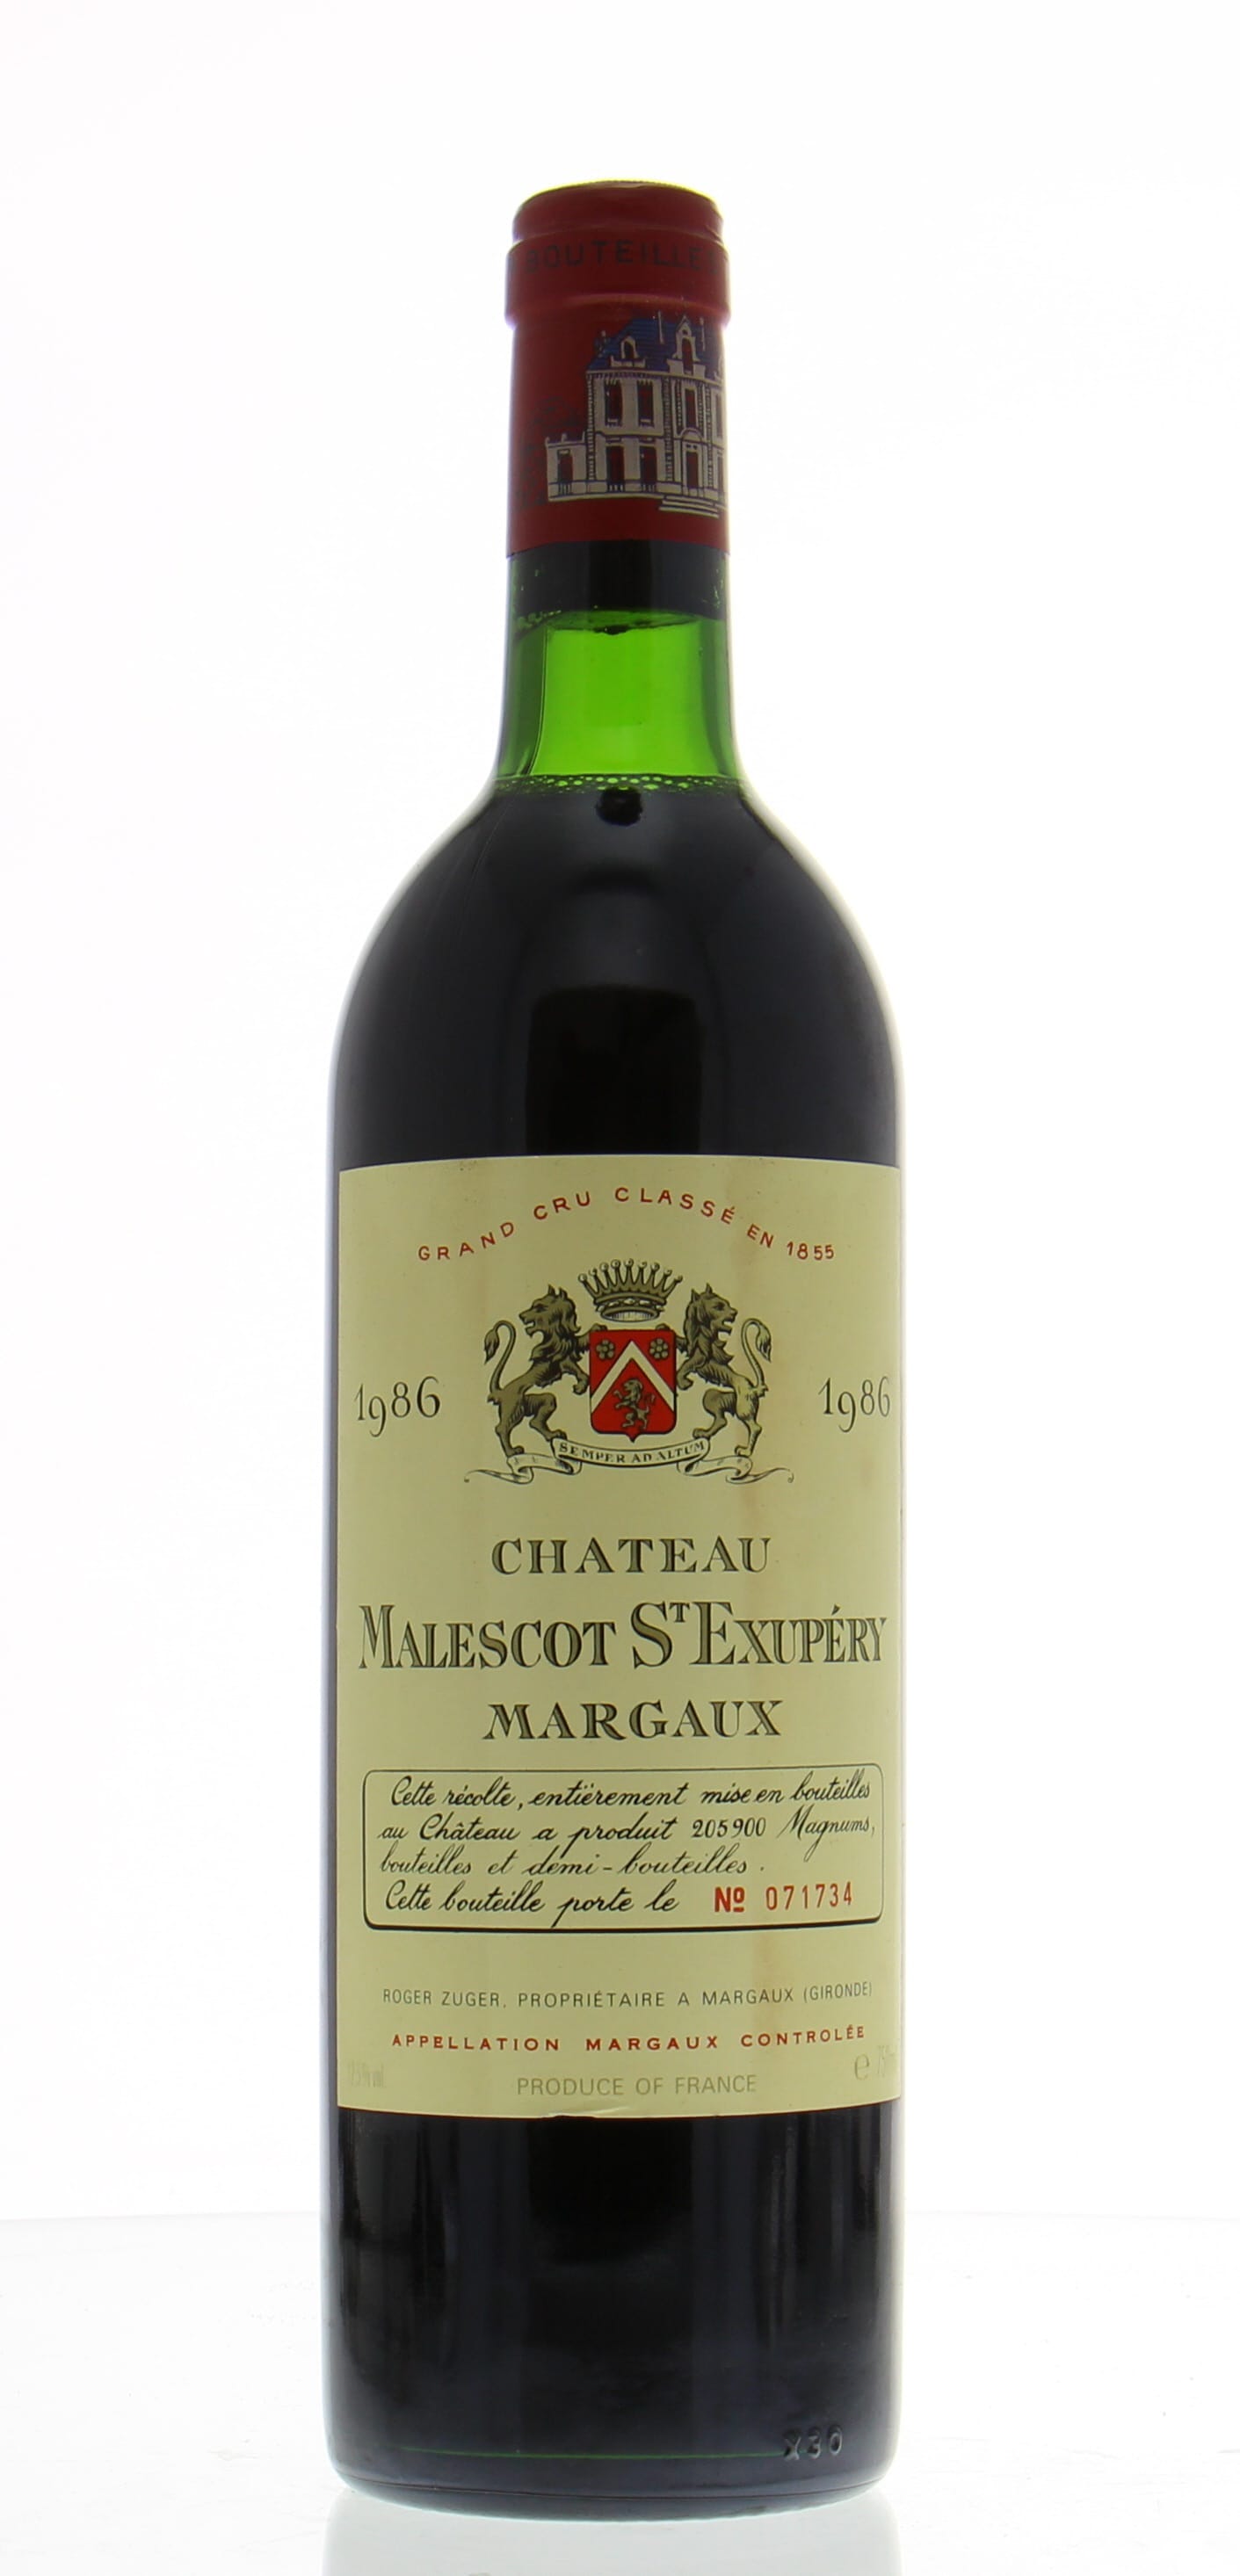 Chateau Malescot-St-Exupery - Chateau Malescot-St-Exupery 1986 Perfect